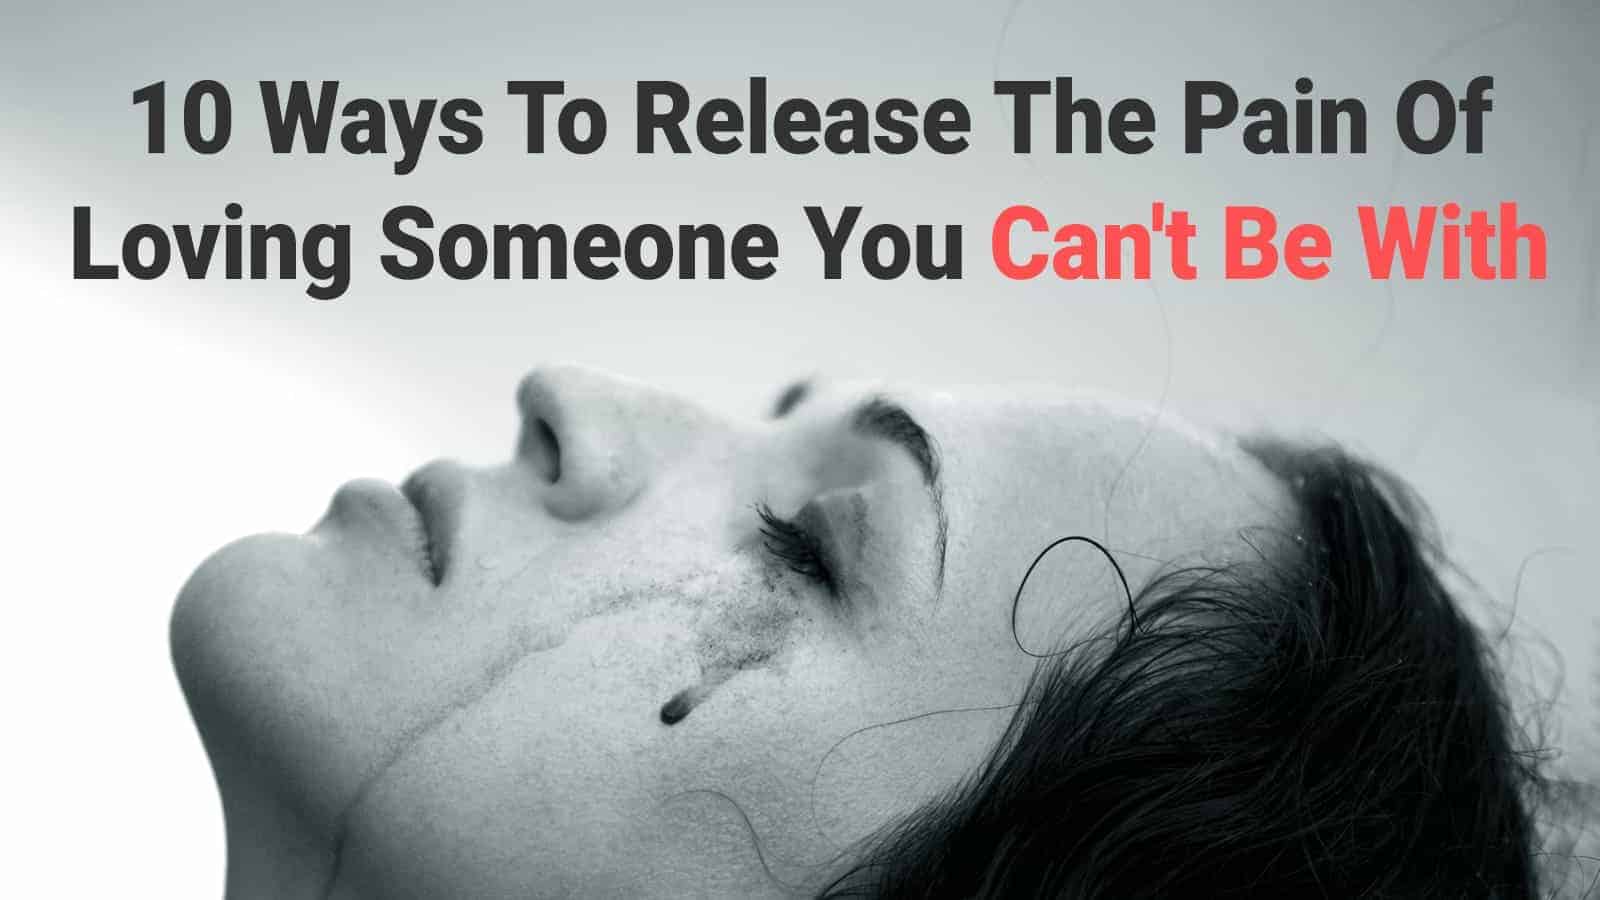 10 Ways To Release The Pain Of Loving Someone You Can’t Be With